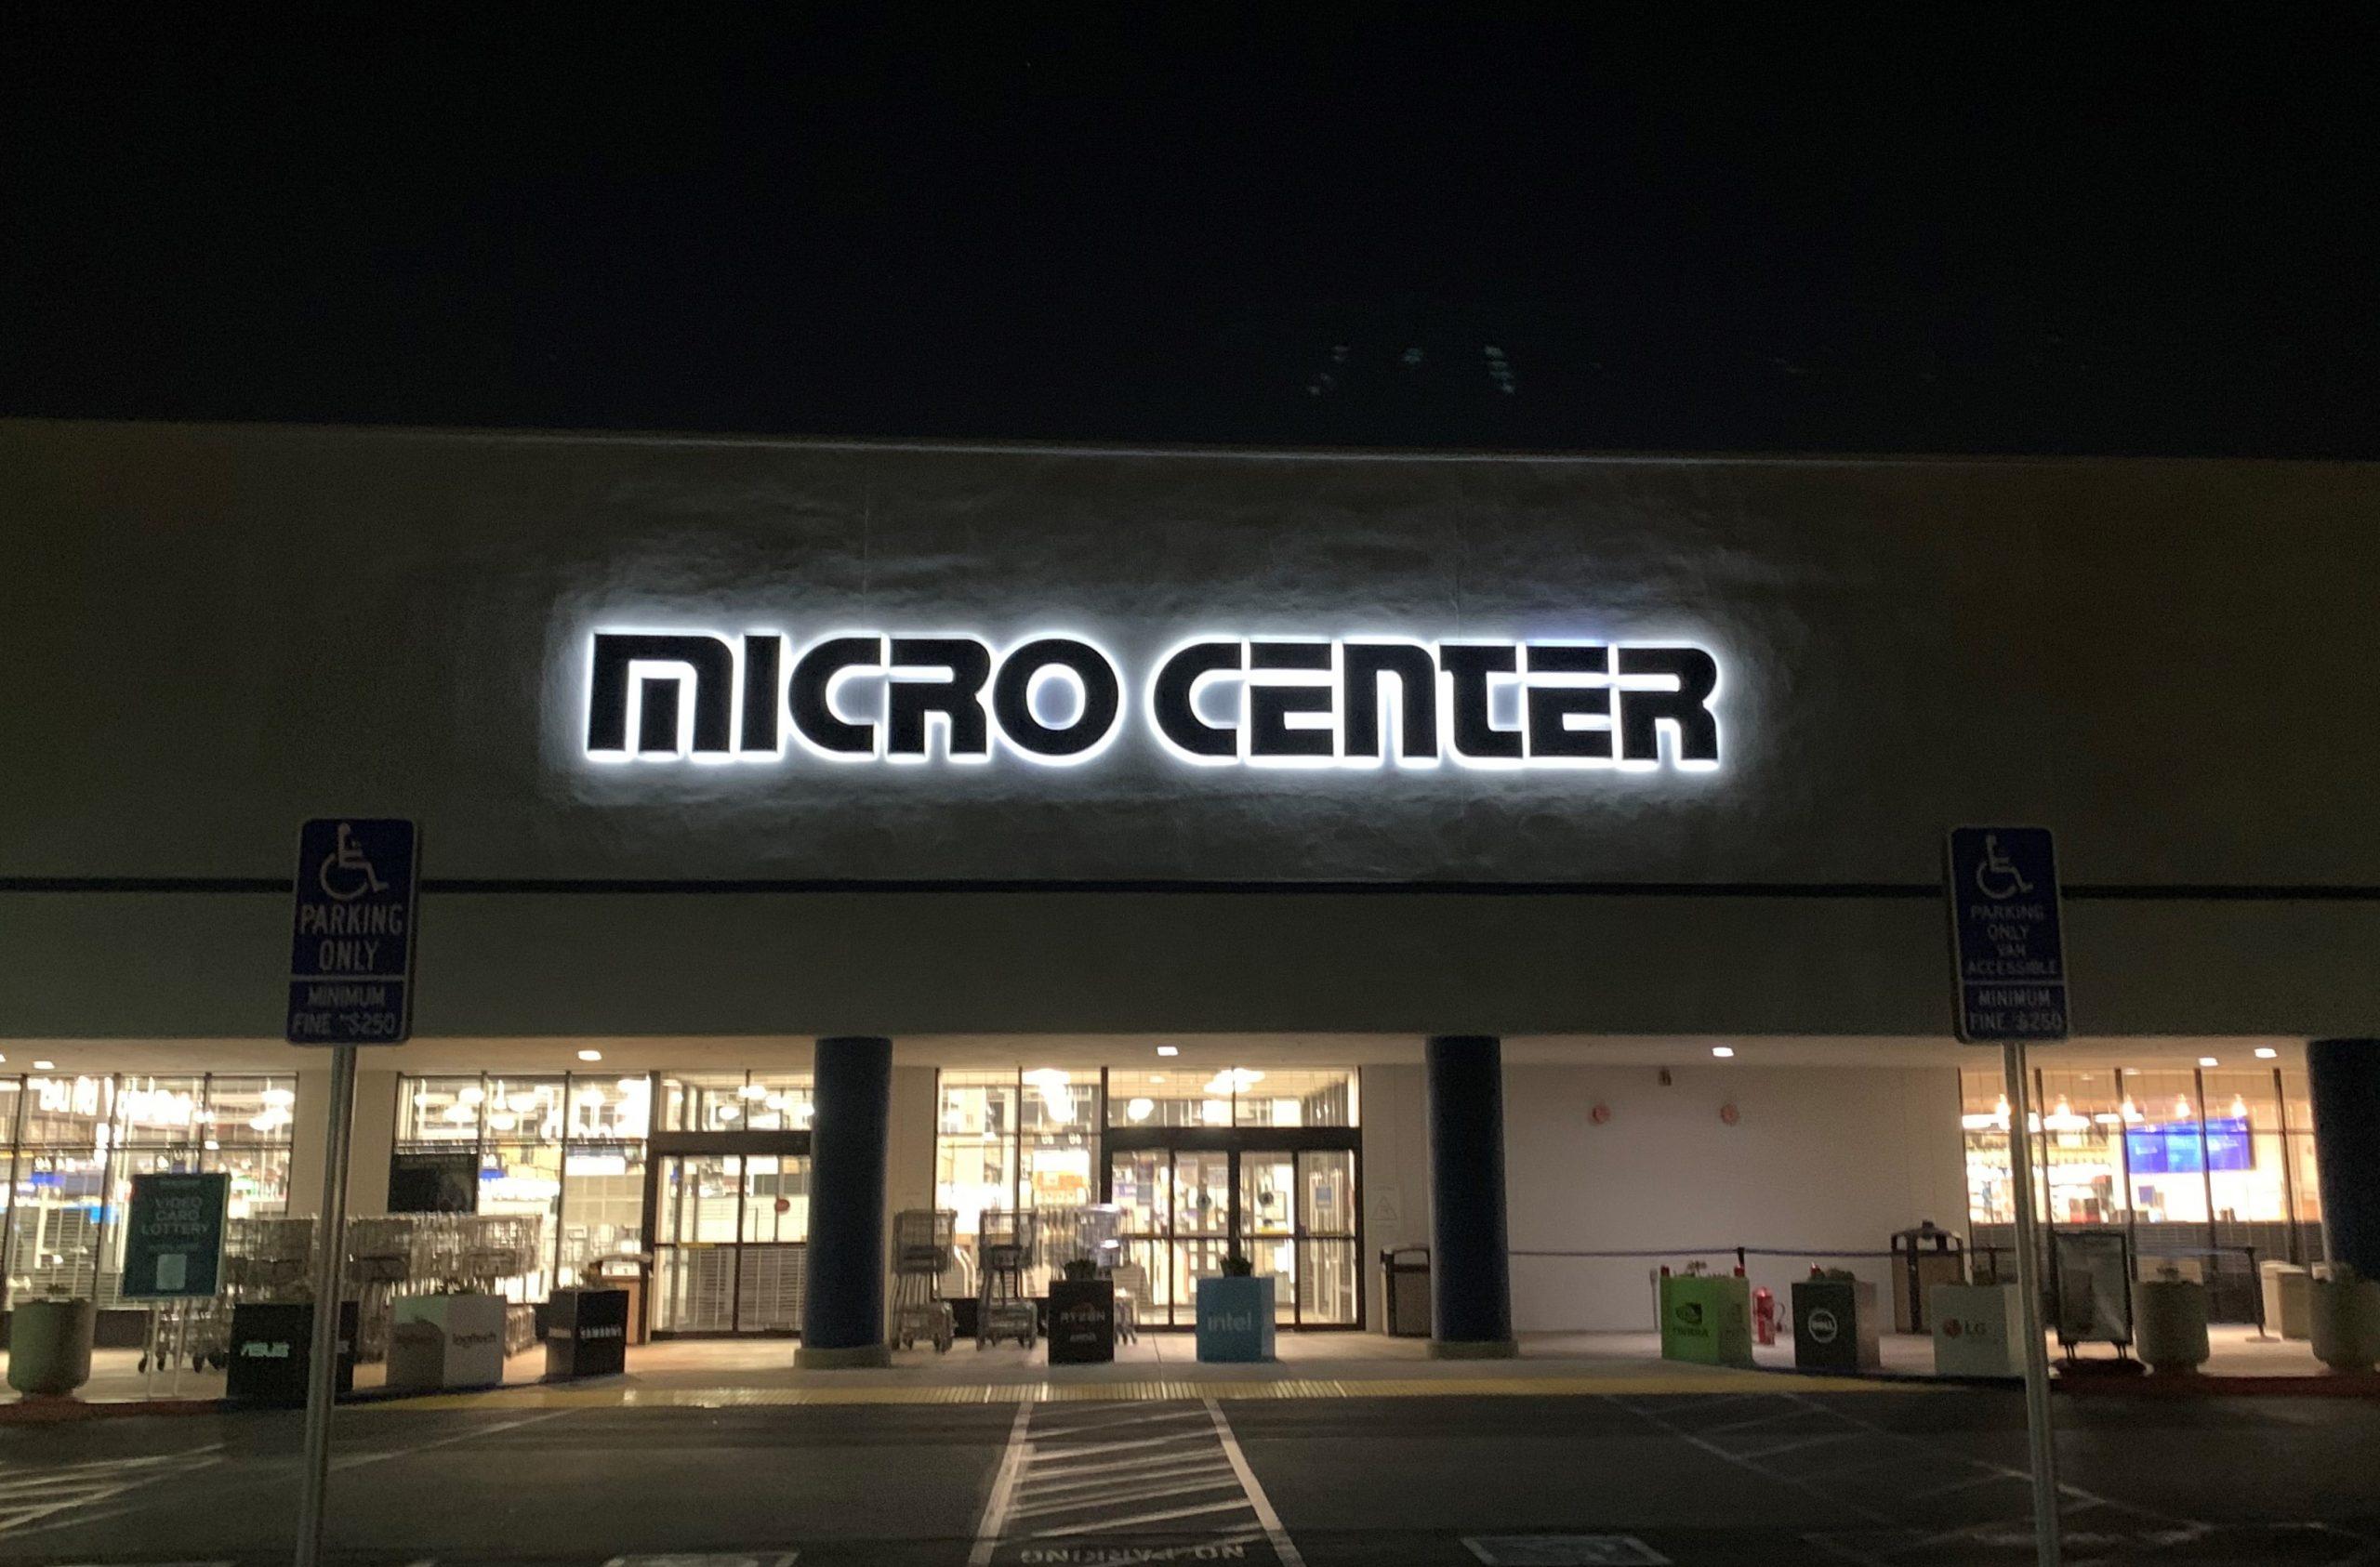 This is the LED sign retrofit we did for Micro Center's Tustin location. A computer store needs eye-catching and modern-looking signage to attract customers.